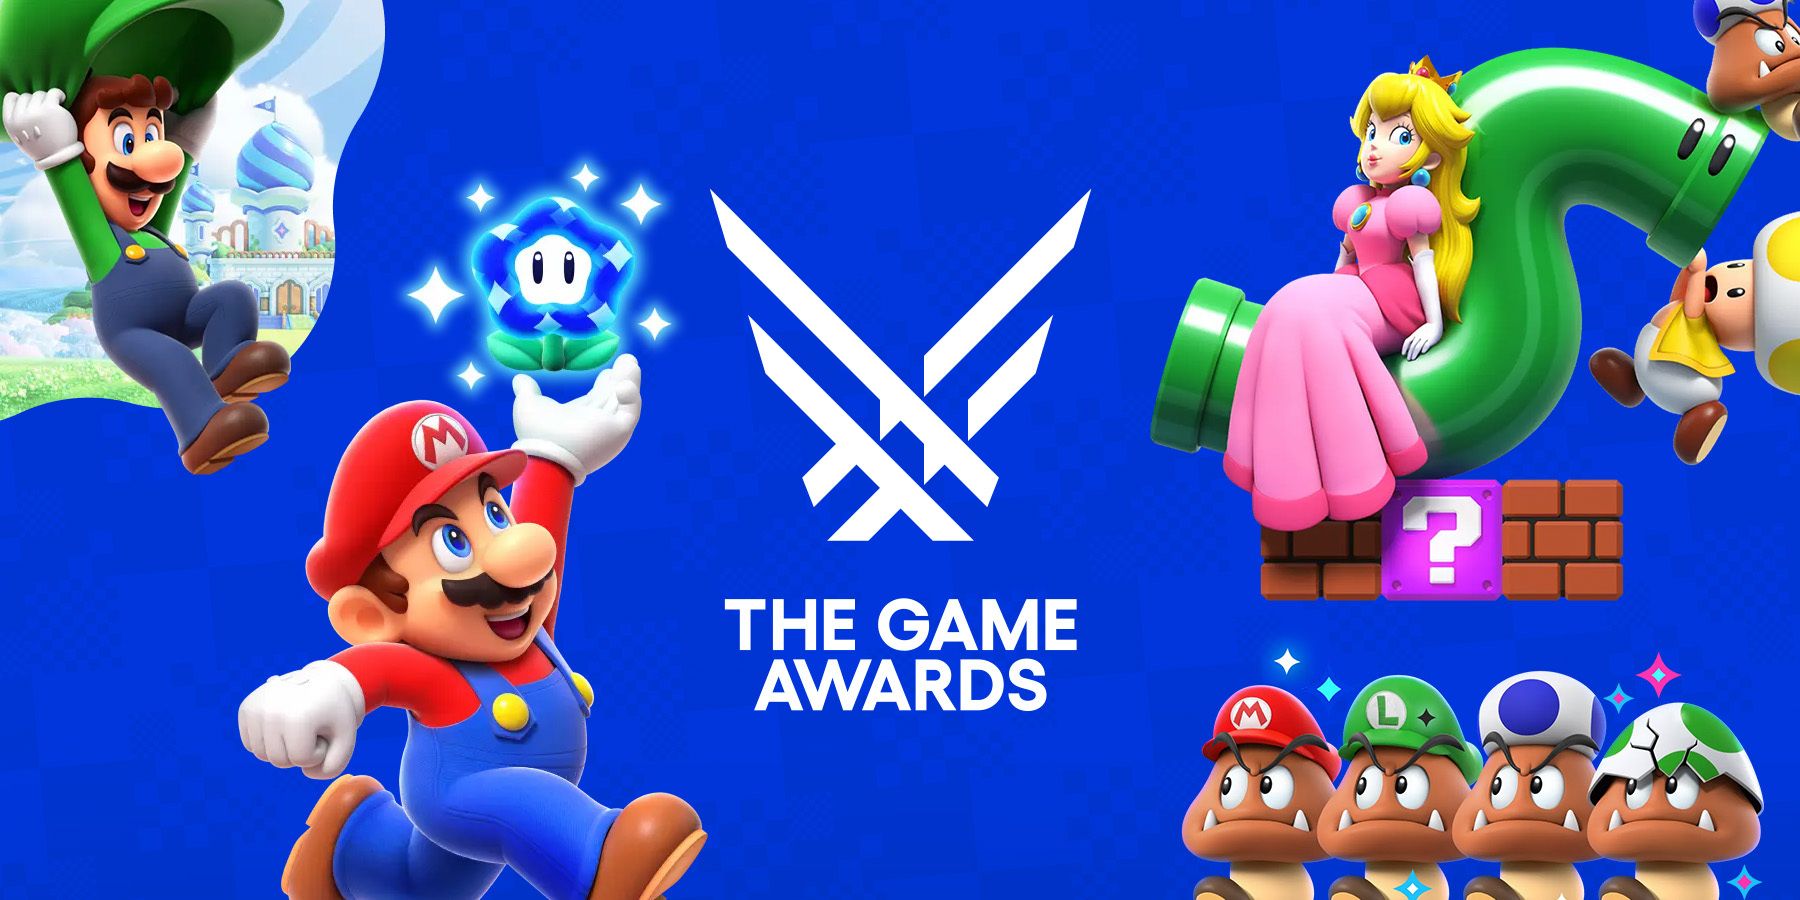 Does it play? on X: Best Nintendo Switch Game of the Year 2023 goes to  Super Mario Bros. Wonder. The greatest in a great lineup of Switch games  last year. @Nintendo has